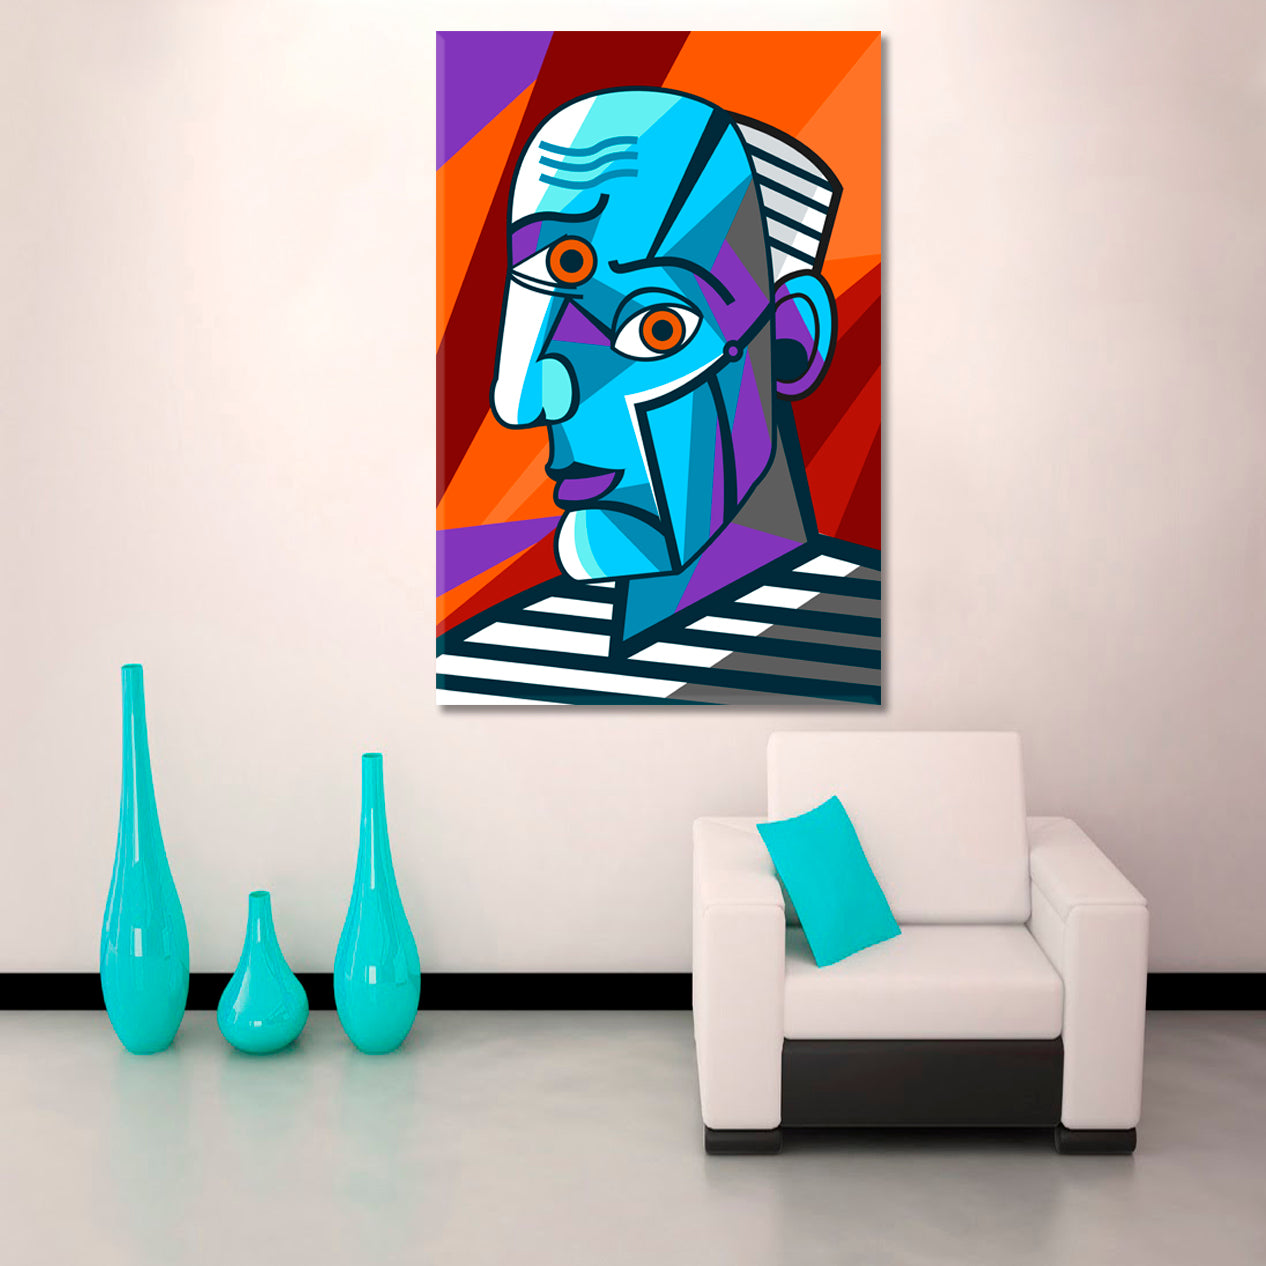 GREAT PAINTER FACE Pablo Picasso Abstract Cubism Dadaism - V Cubist Trendy Large Art Print Artesty 1 Panel 16"x24" 